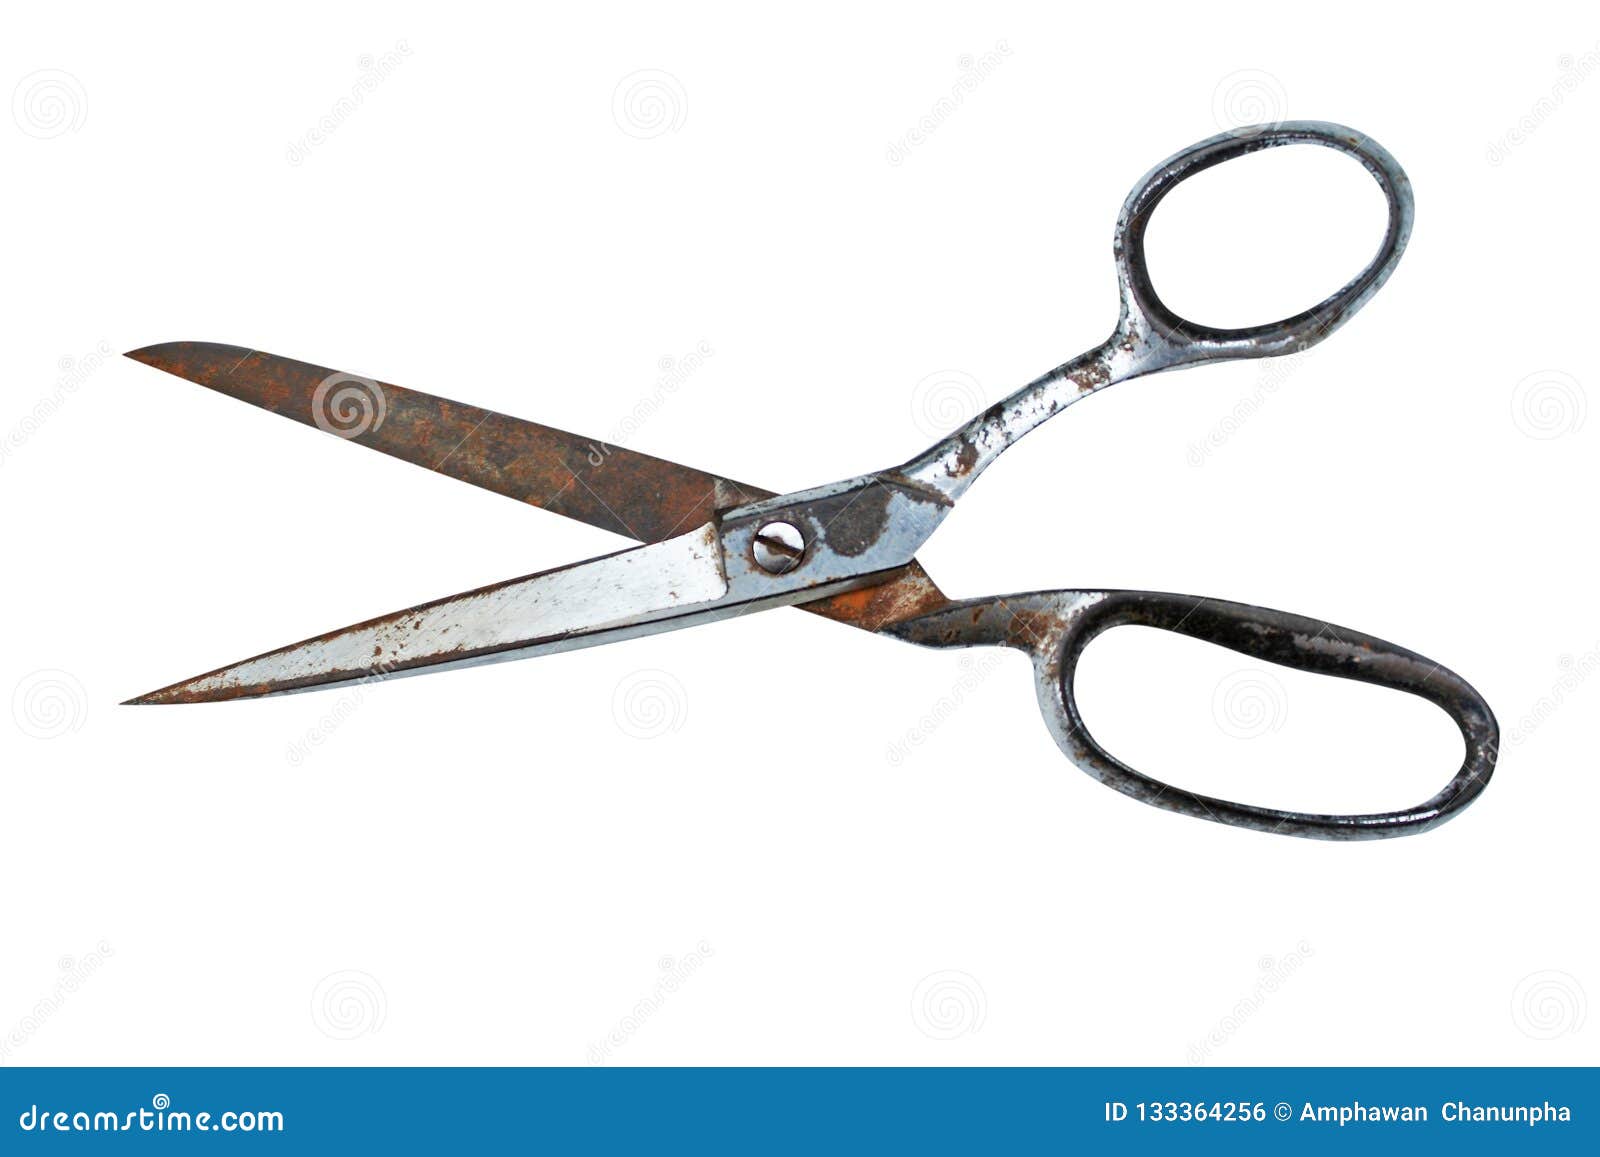 vintage household scissors isolated over white background